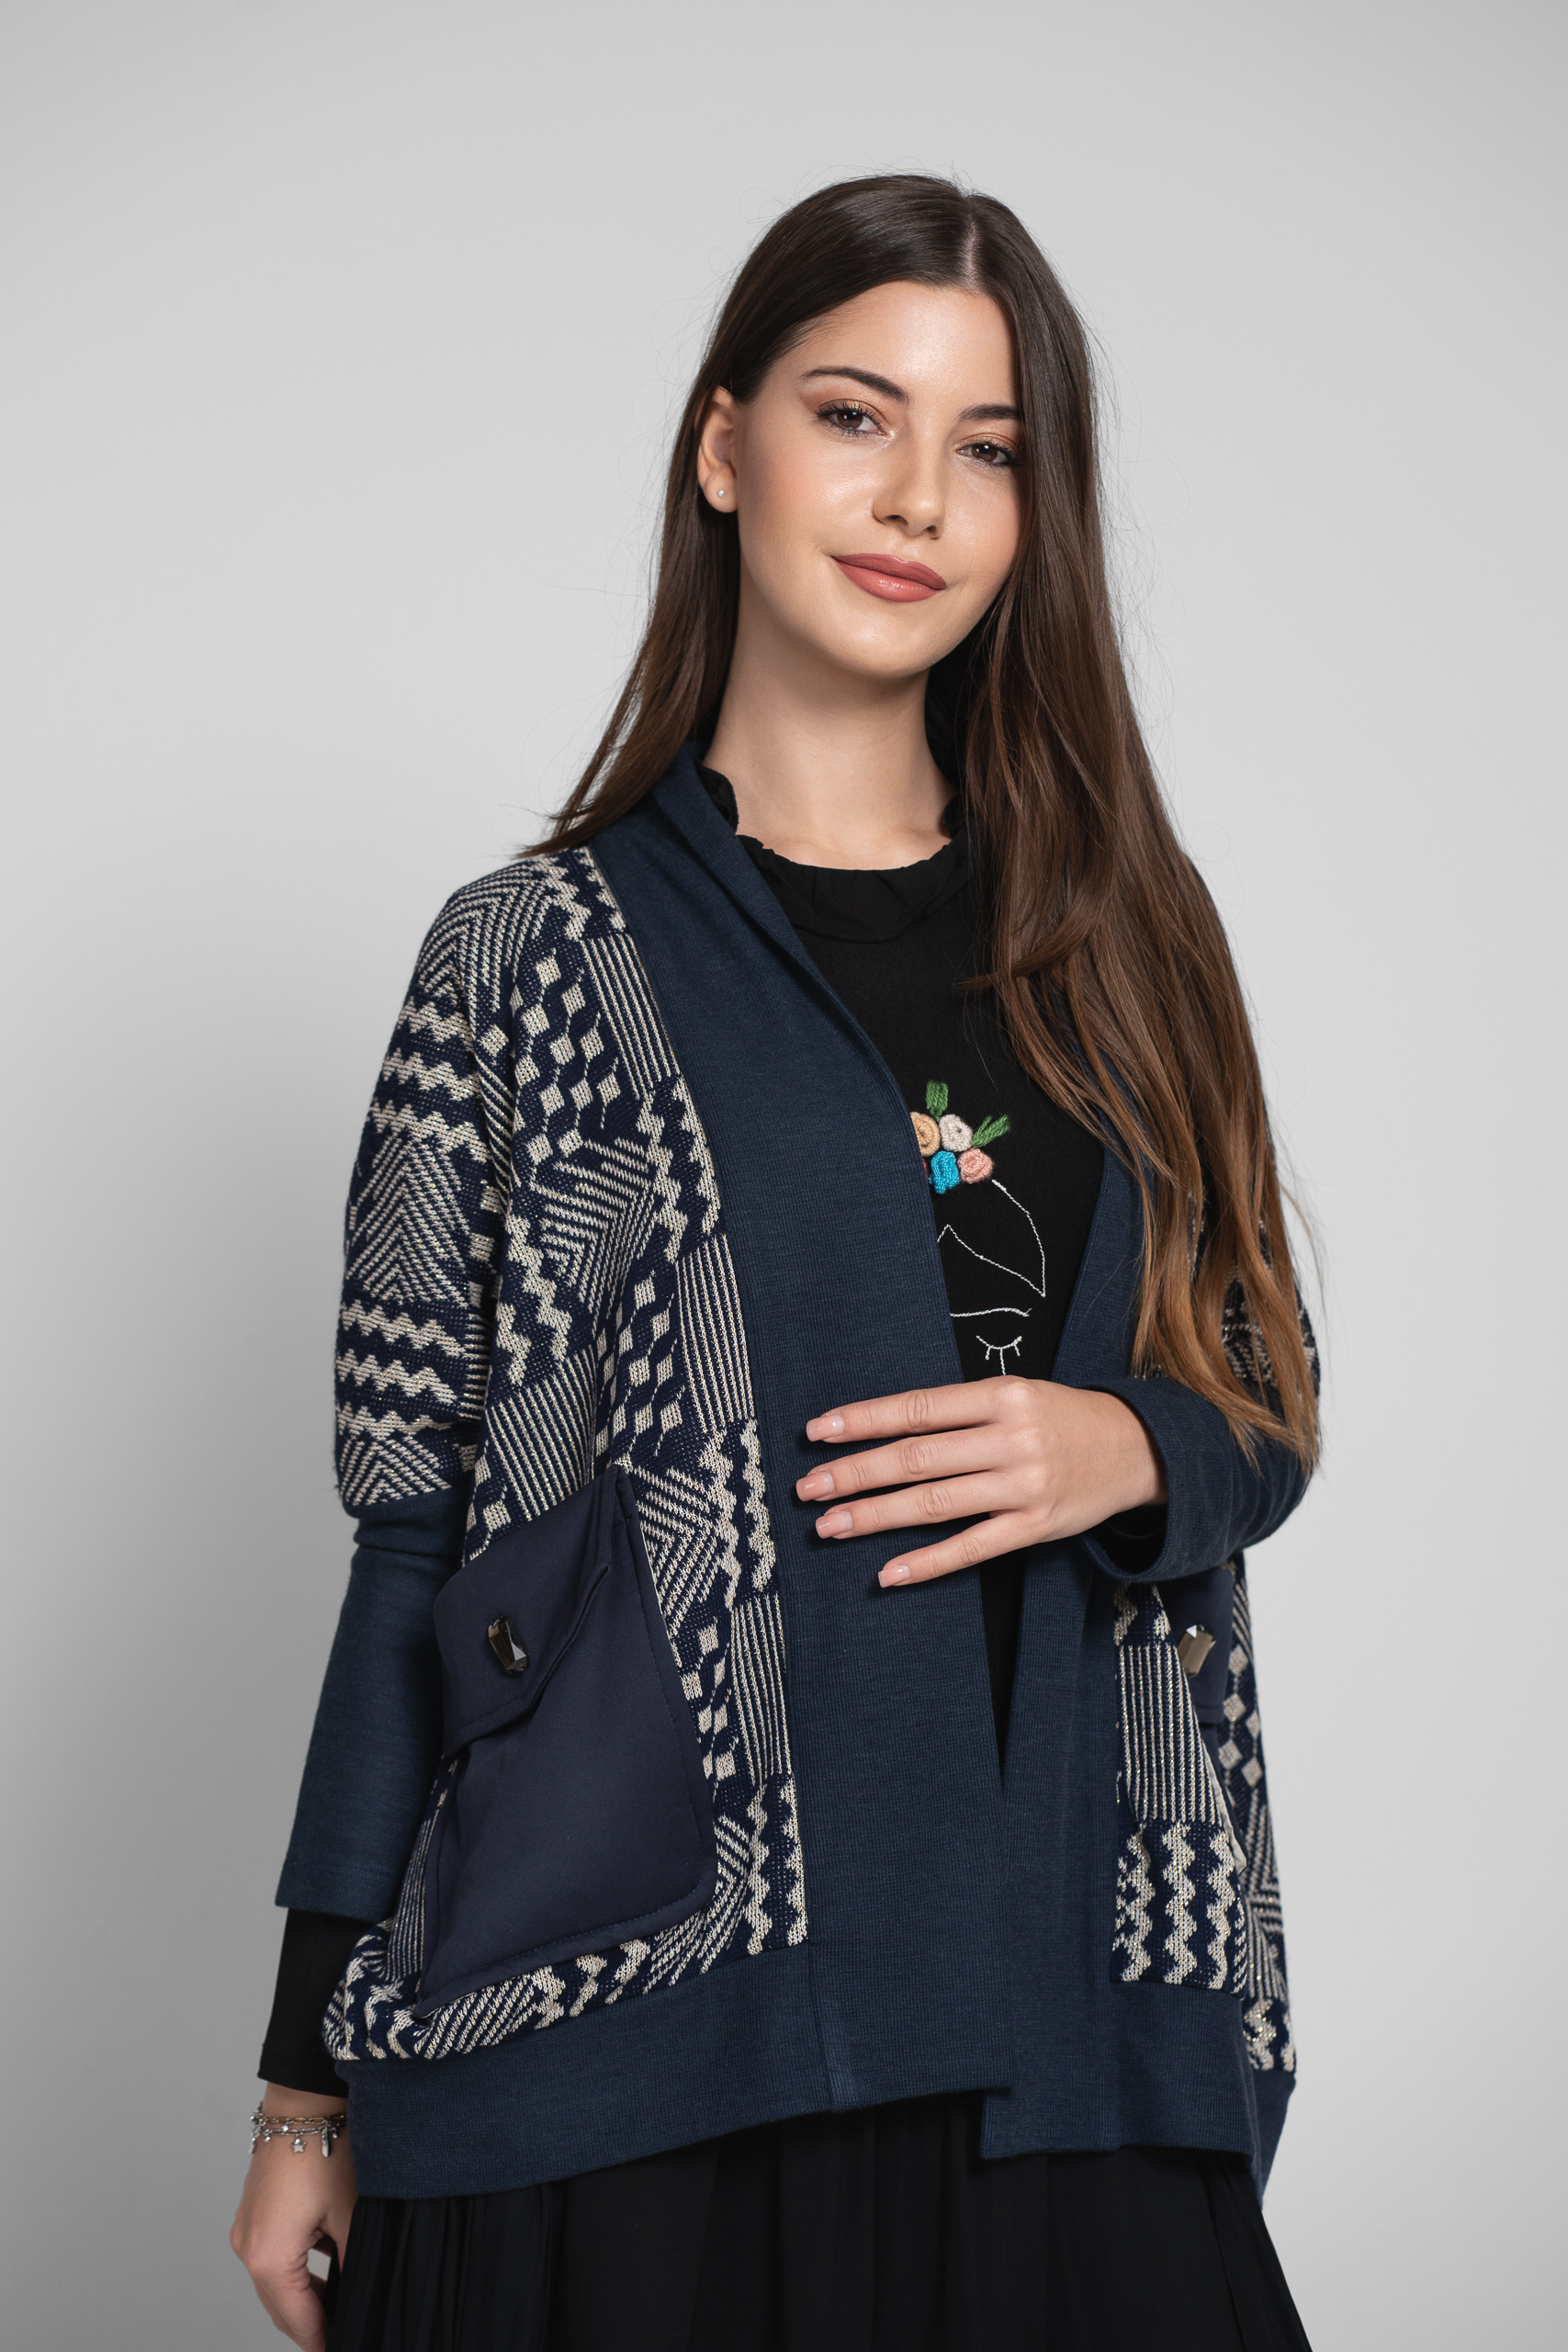 AMON CASUAL BLUE SWEATER WITH POCKETS. Natural fabrics, original design, handmade embroidery